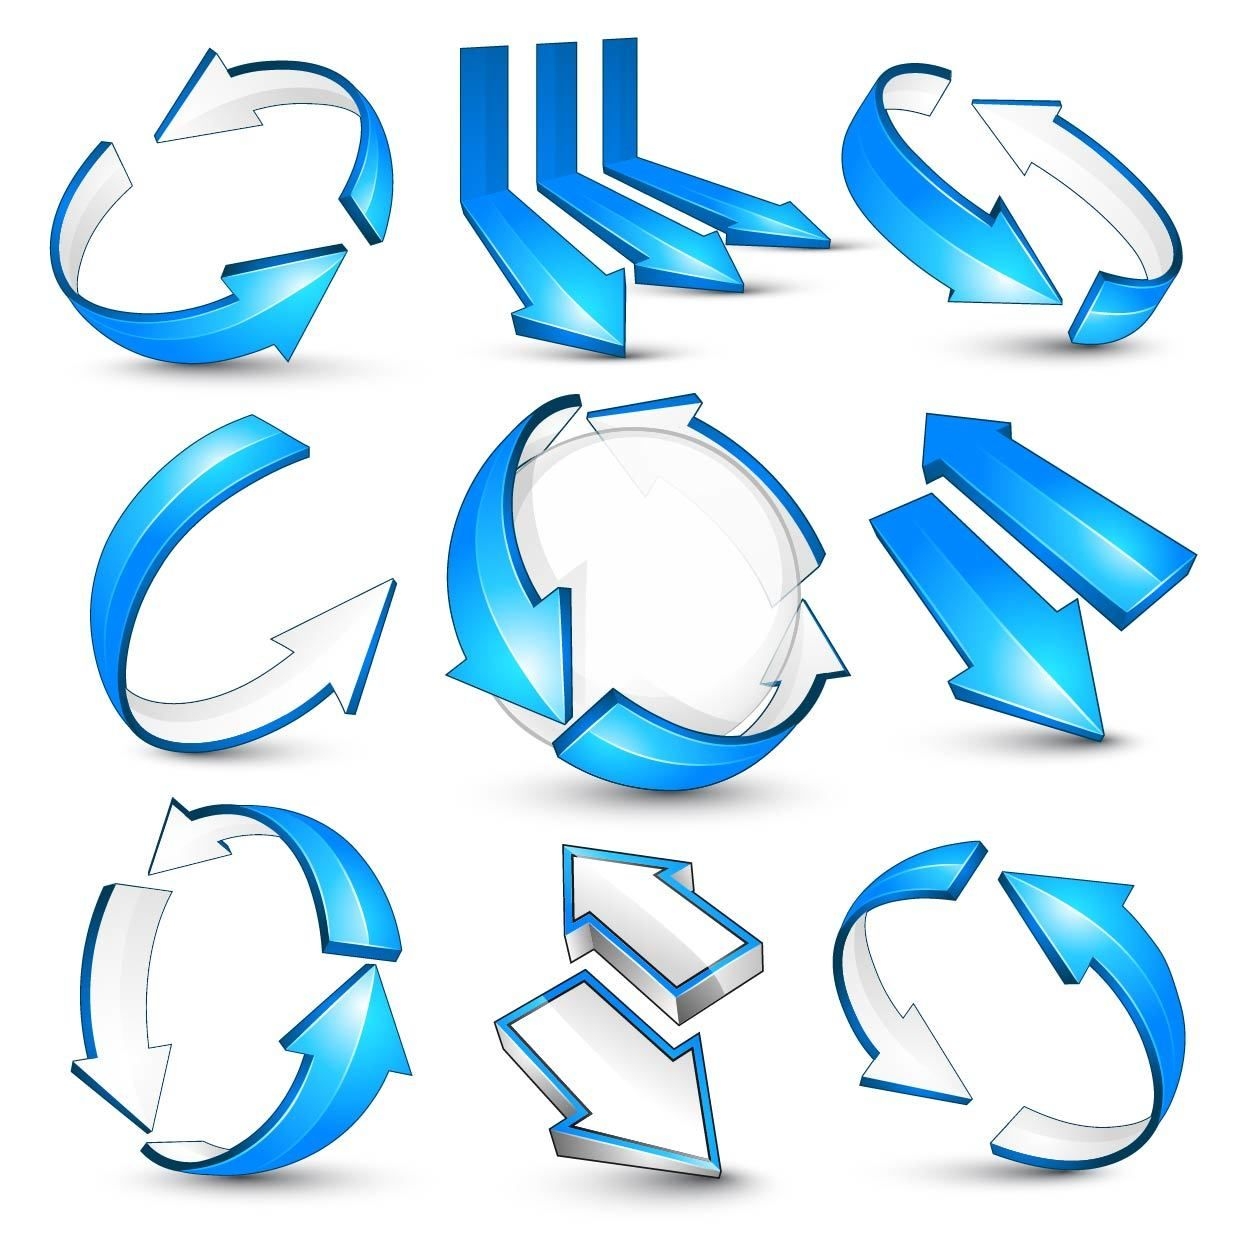 Download Glossy Blue 3D Arrow Pack - Vector download